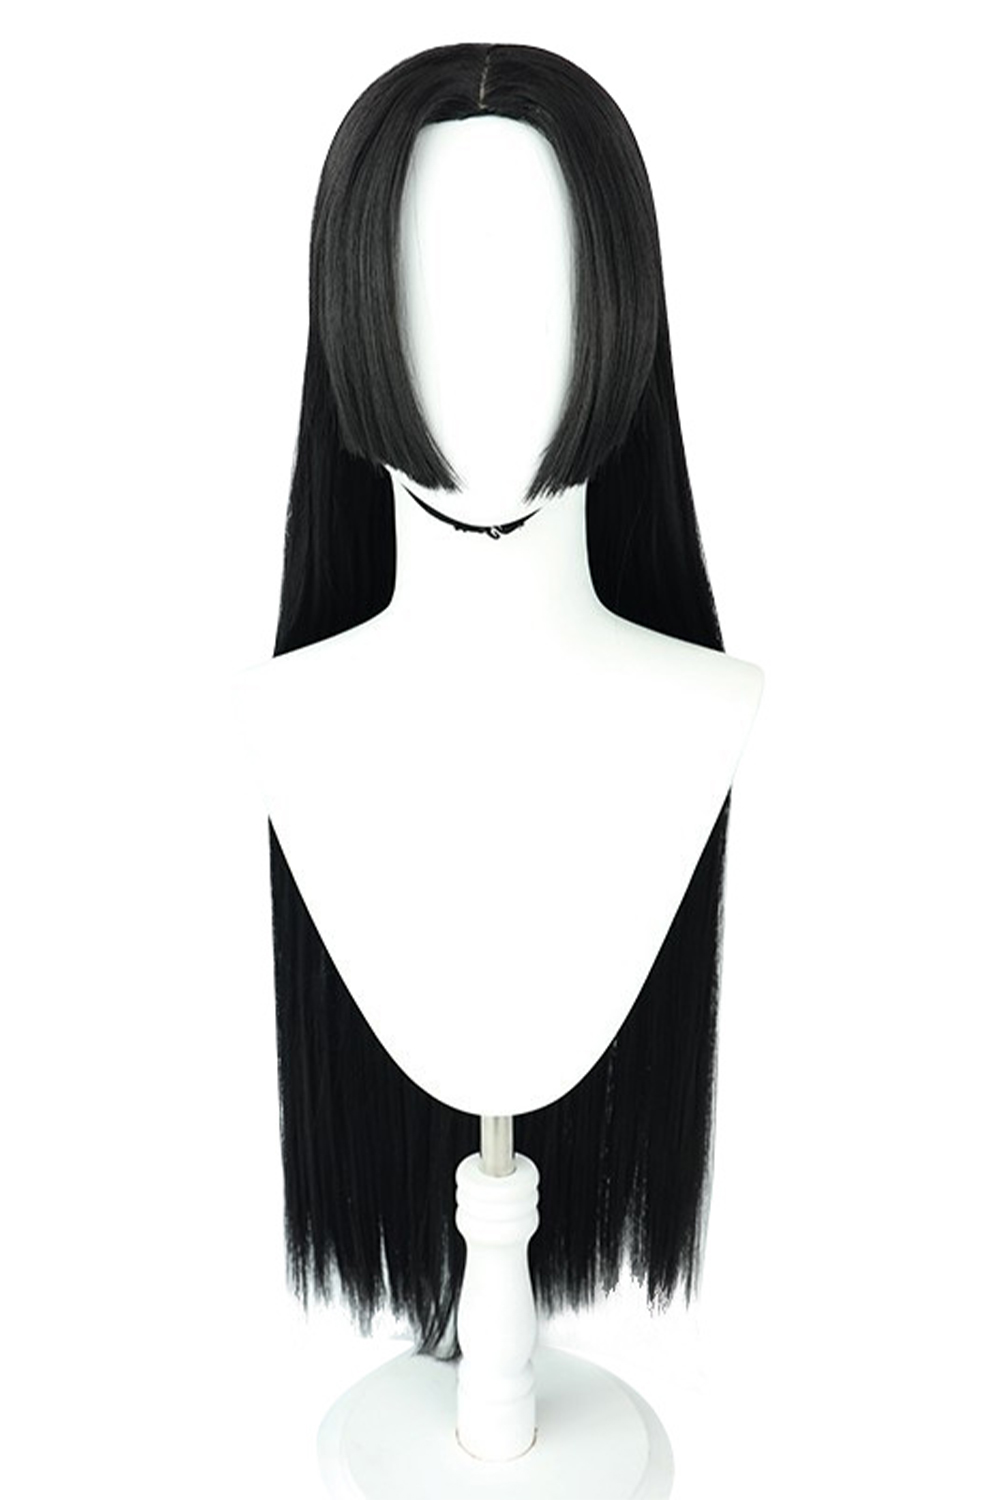 Anime One Piece Boa Hancock Princess Cosplay Wig Heat Resistant Synthetic Hair Halloween Costume Accessories